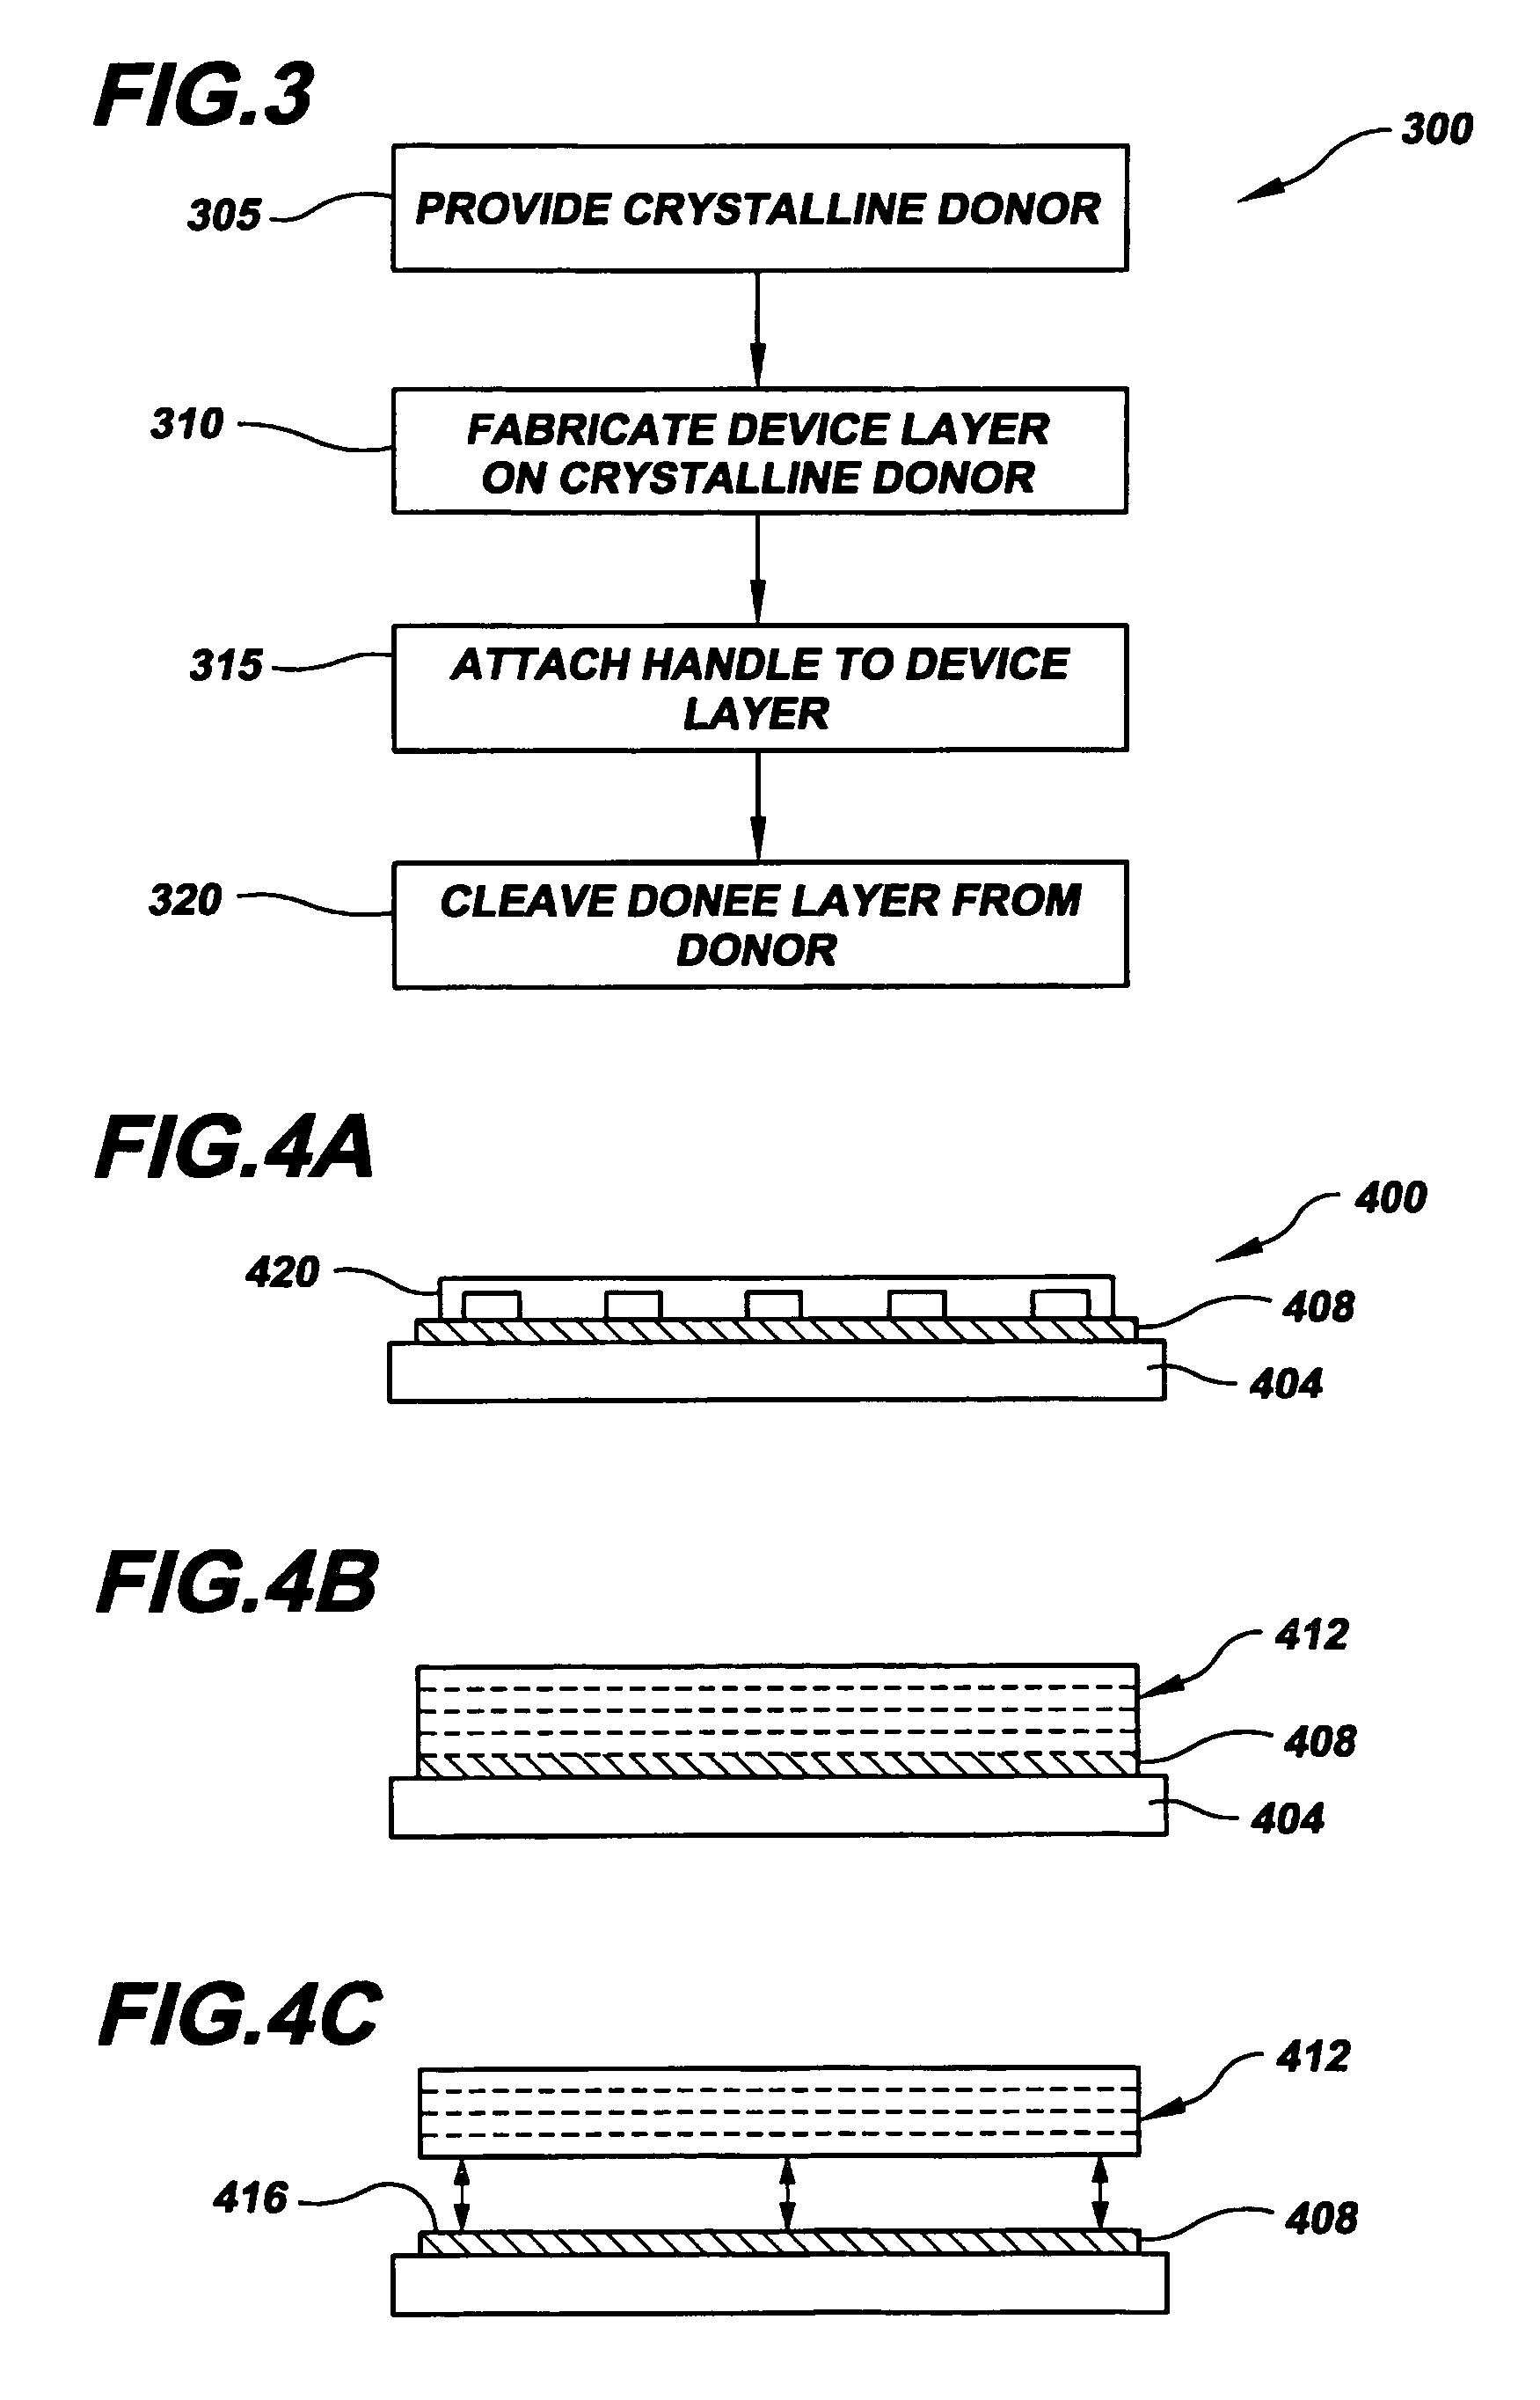 System and method for manufacturing thick and thin film devices using a donee layer cleaved from a crystalline donor